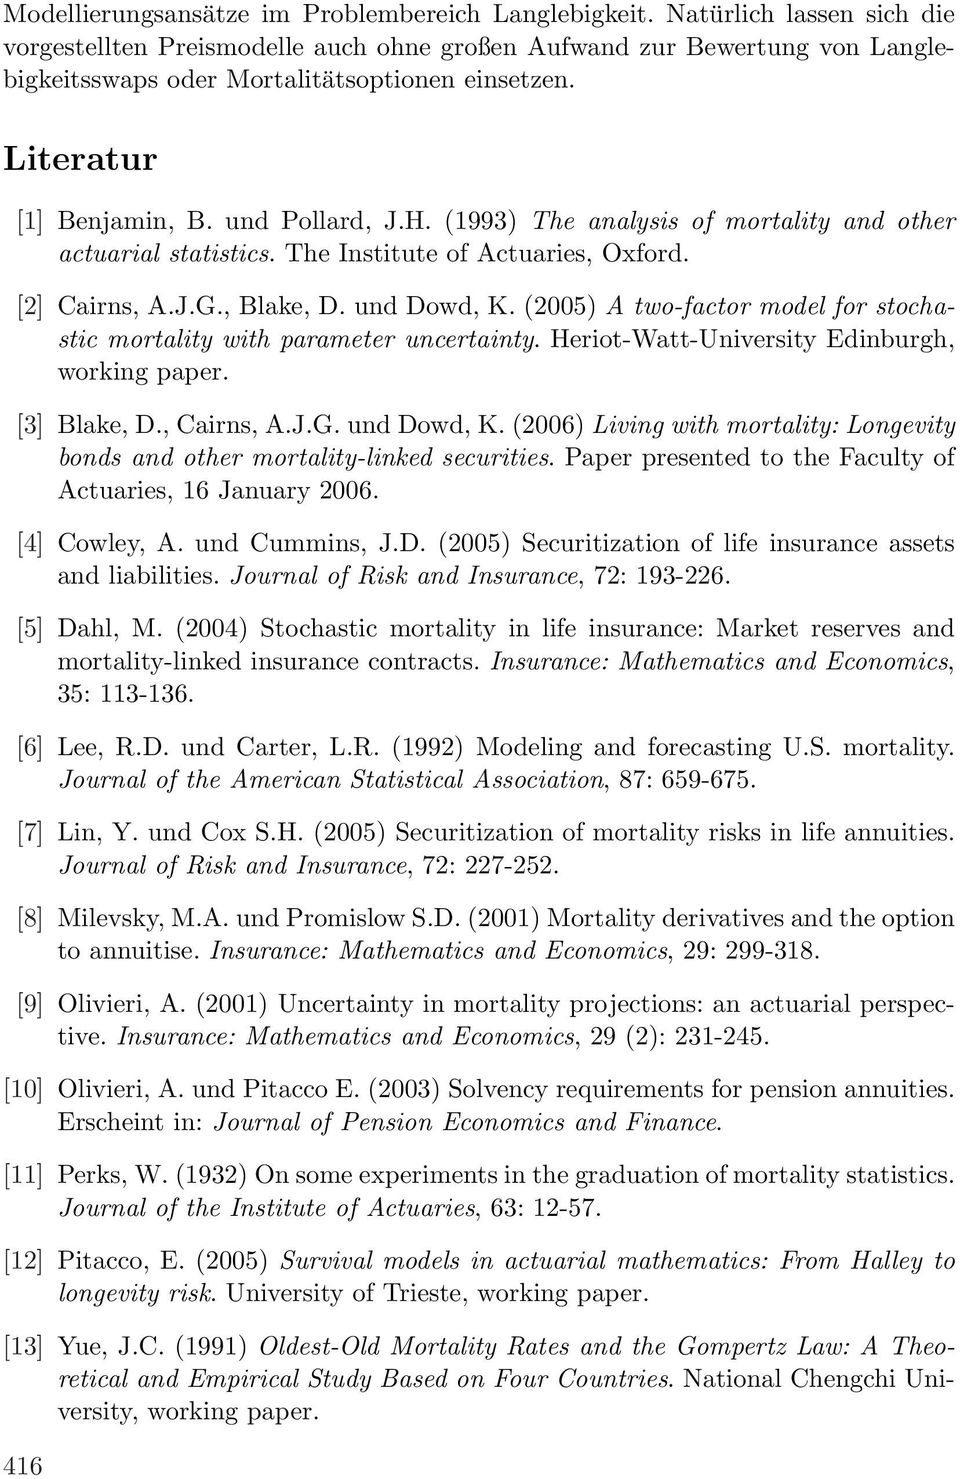 (1993) The analysis of mortality and other actuarial statistics. The Institute of Actuaries, Oxford. [2] Cairns, A.J.G., Blake, D. und Dowd, K.